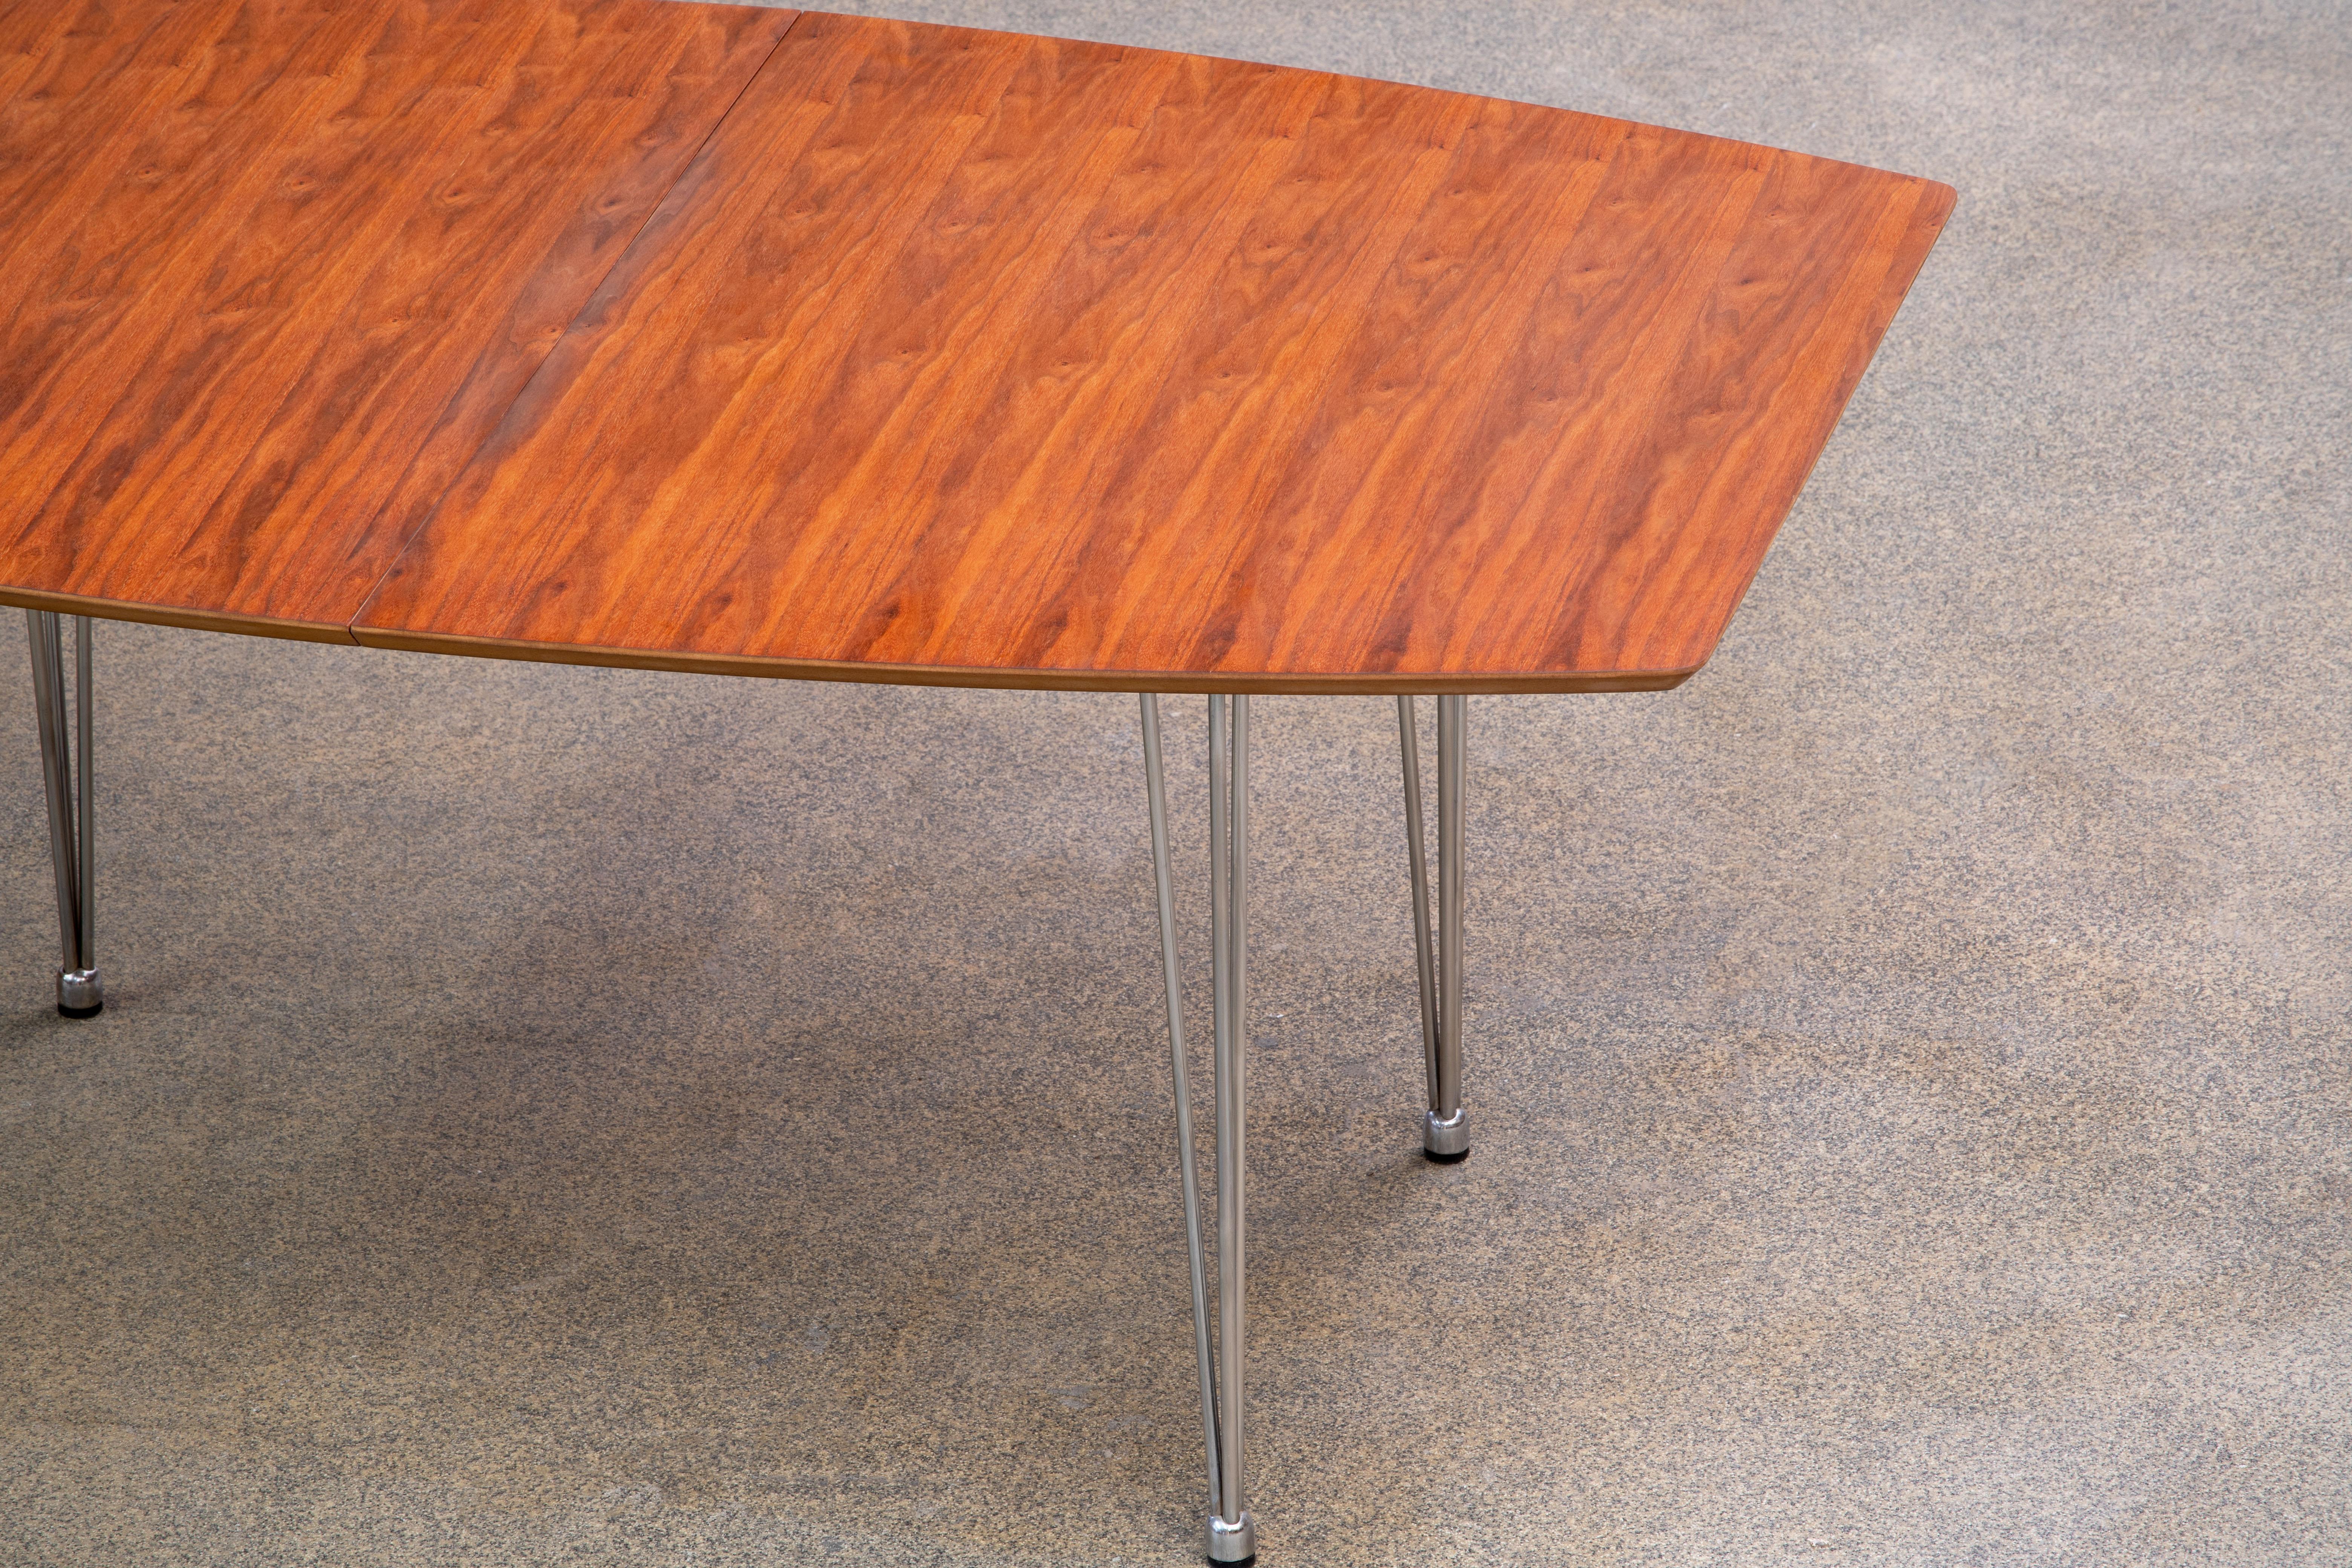 Danish Scandinavian Midcentury Walnut and Chrome Dining Table with 2 Extension Leafs For Sale